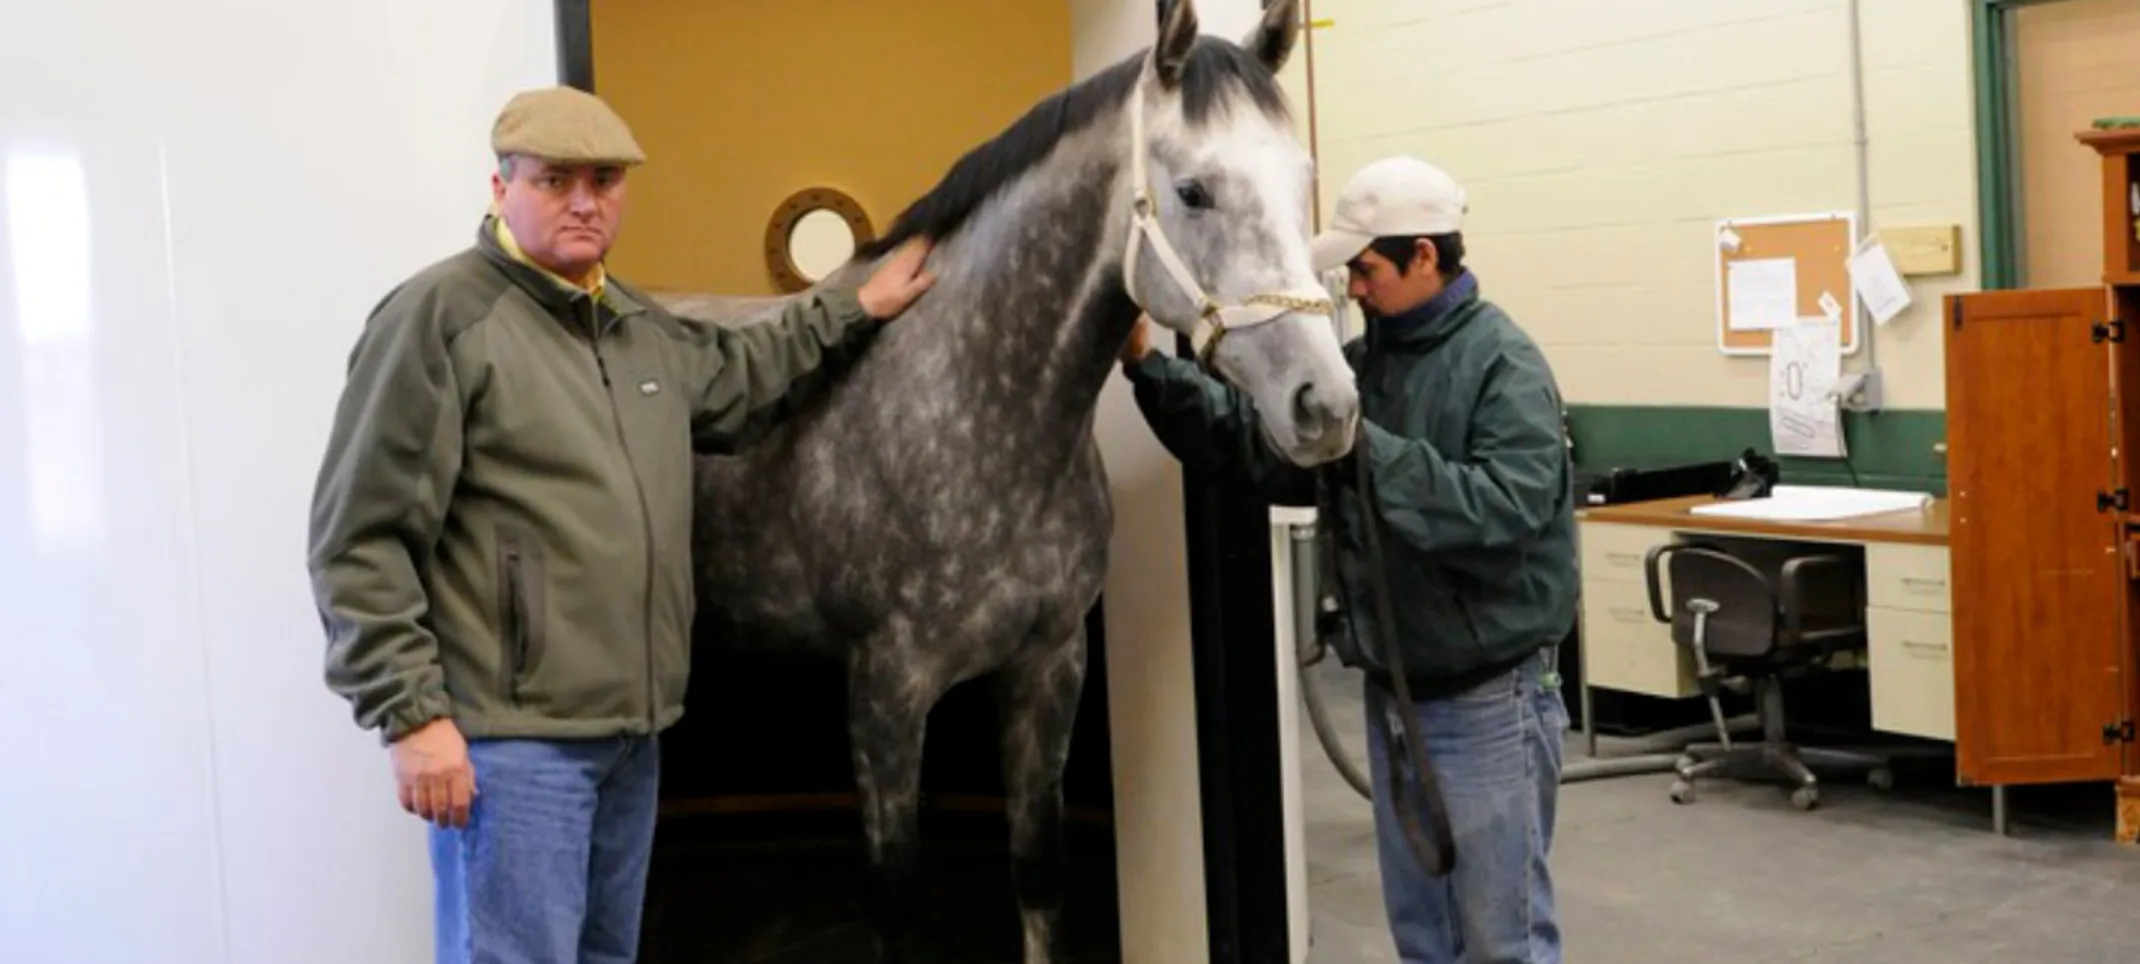 Two men standing with a gray and white speckled horse